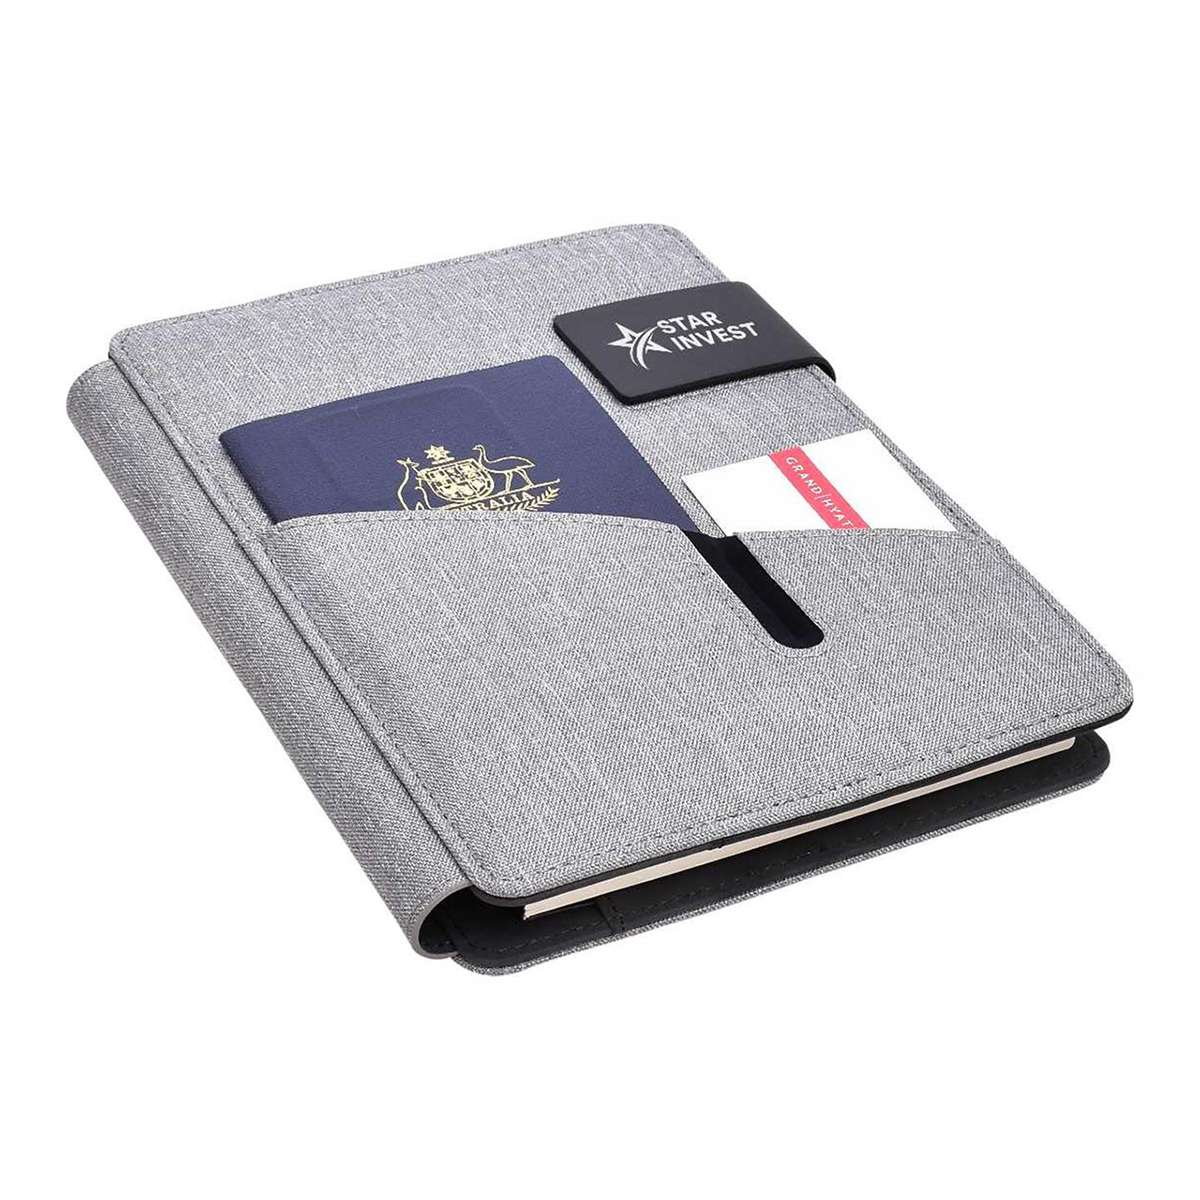 elevate executive journal with card holder and personal document holder